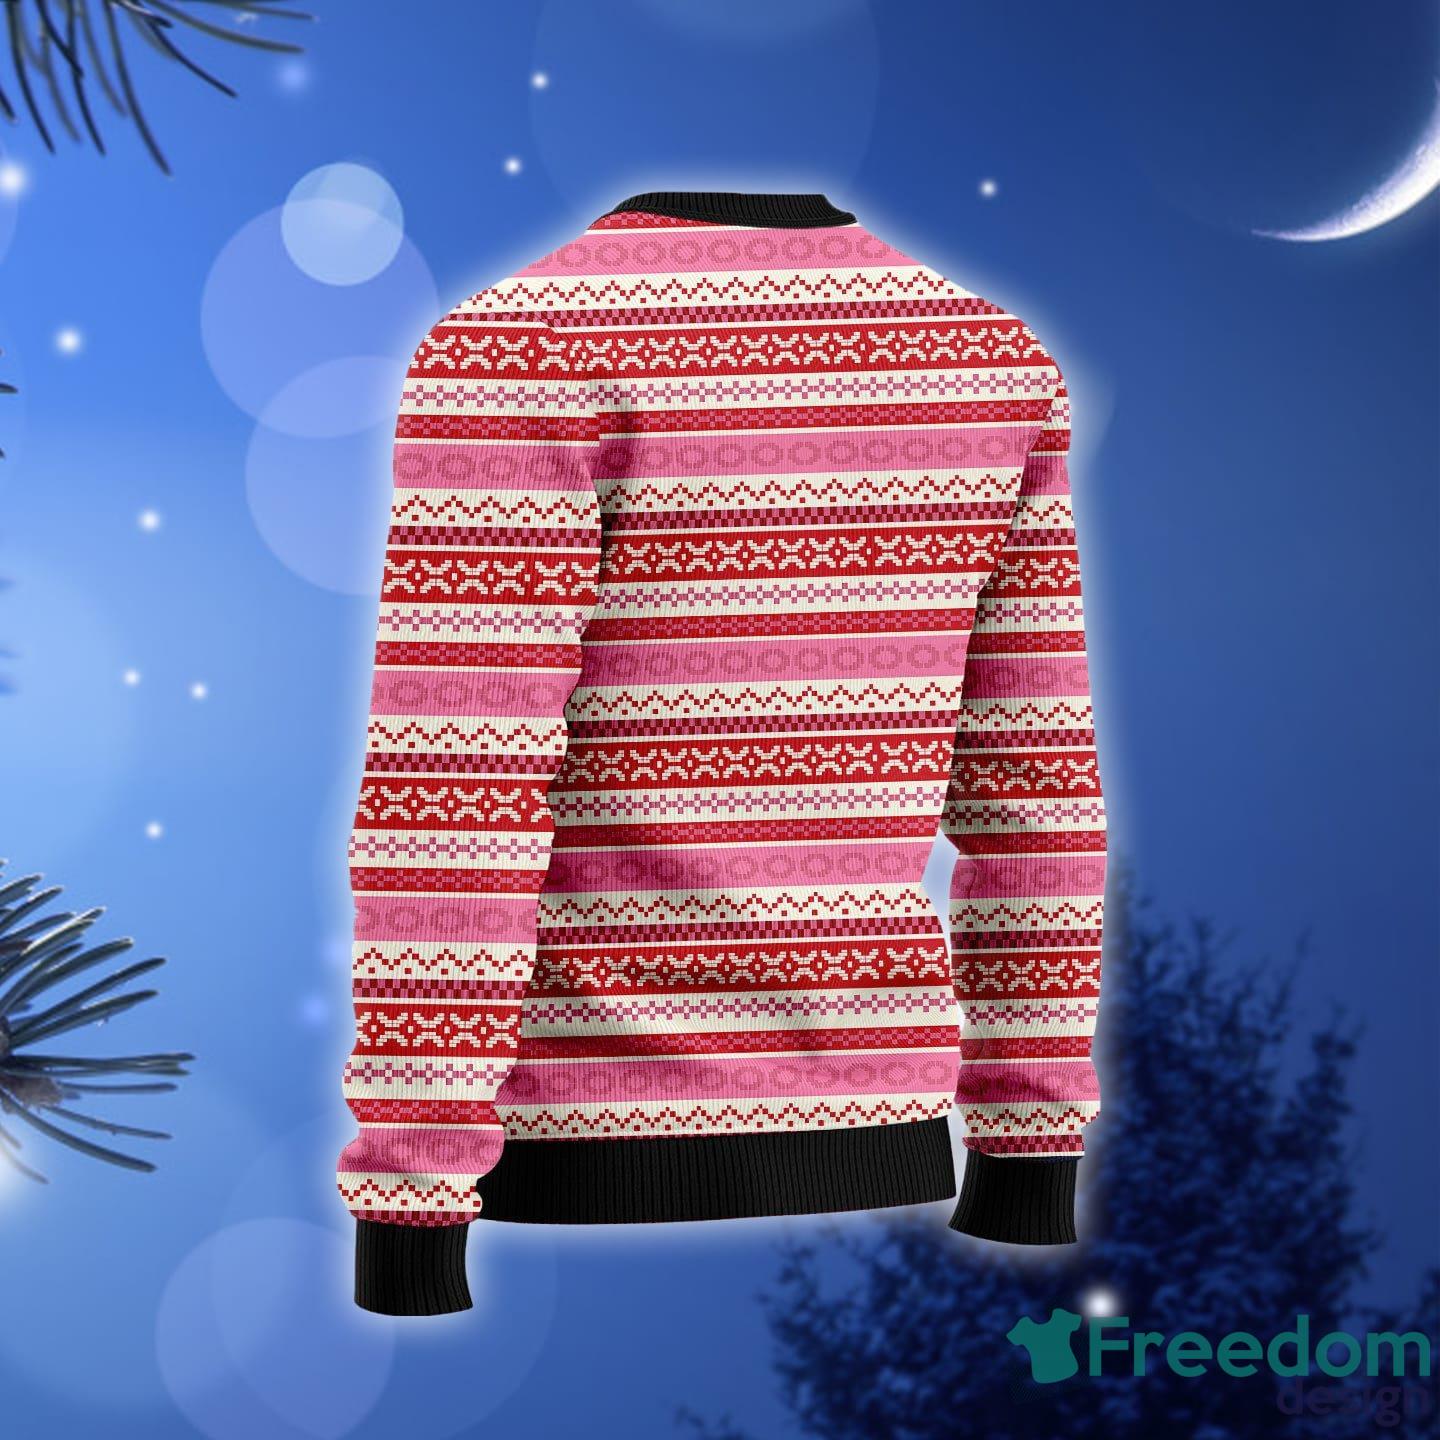 Flamingo Snow Ugly Christmas Sweater Men And Women Gift For Christmas -  Freedomdesign